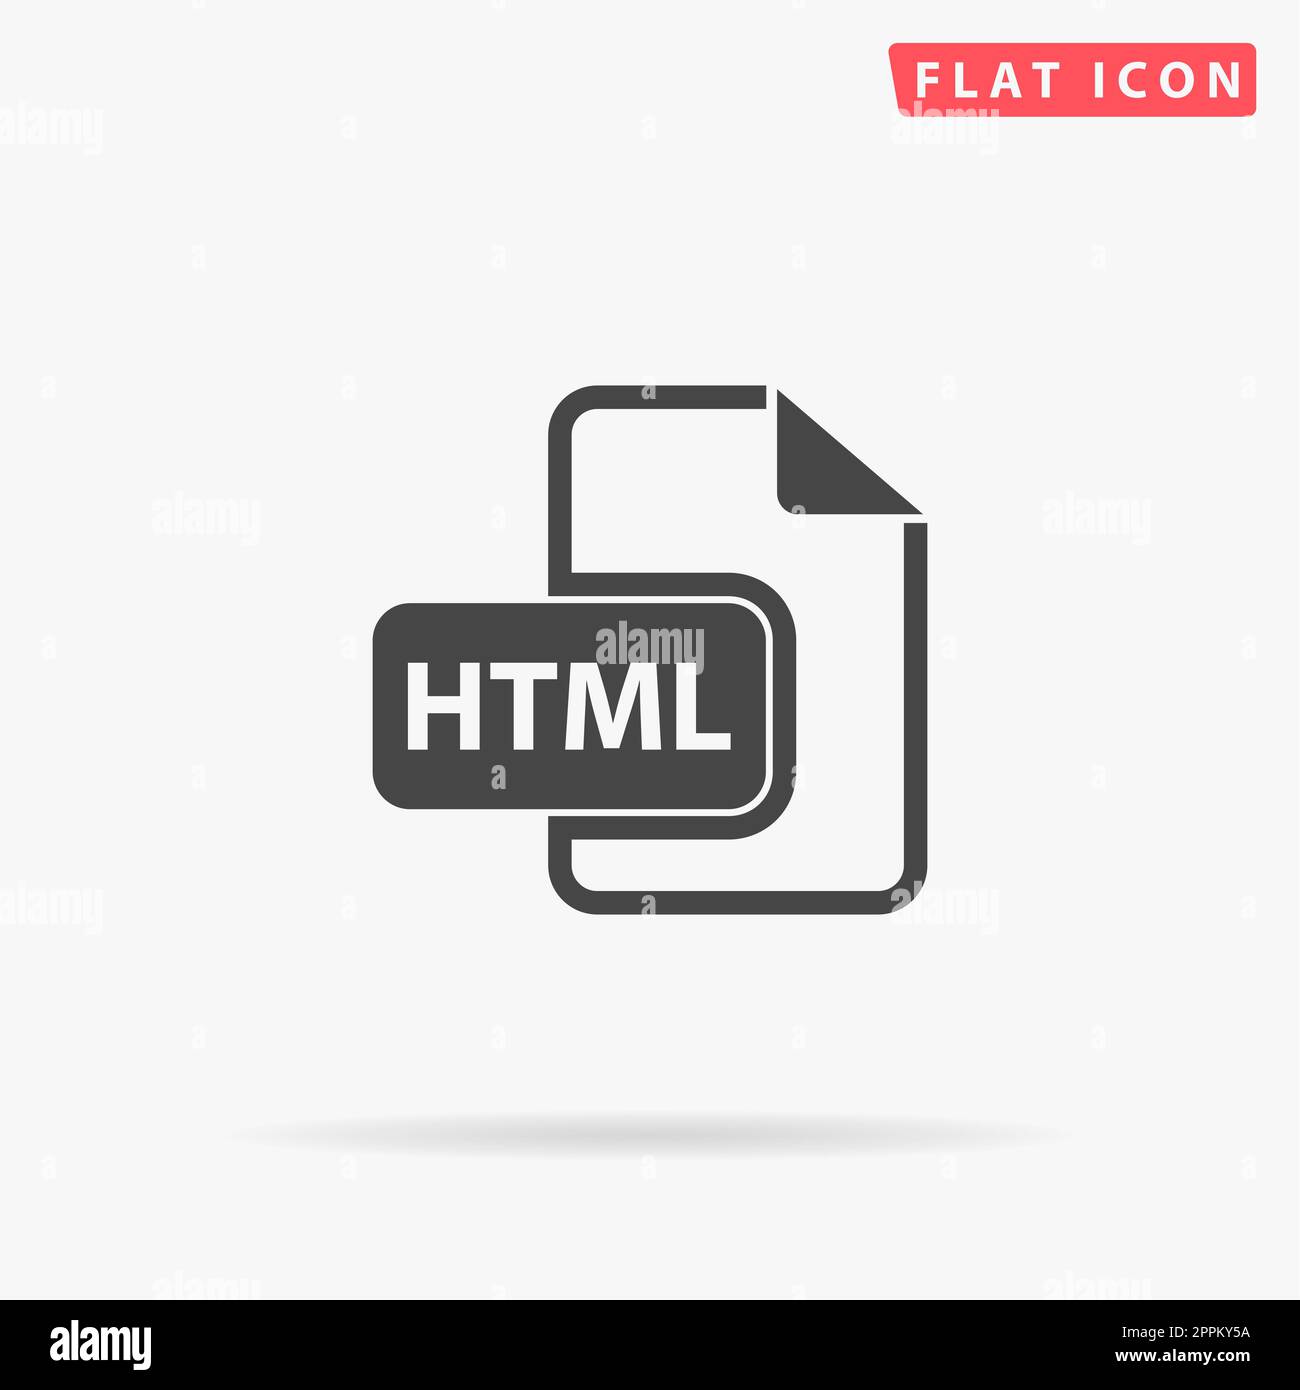 HTML file extension. Simple flat black symbol with shadow on white background. Vector illustration pictogram Stock Photo